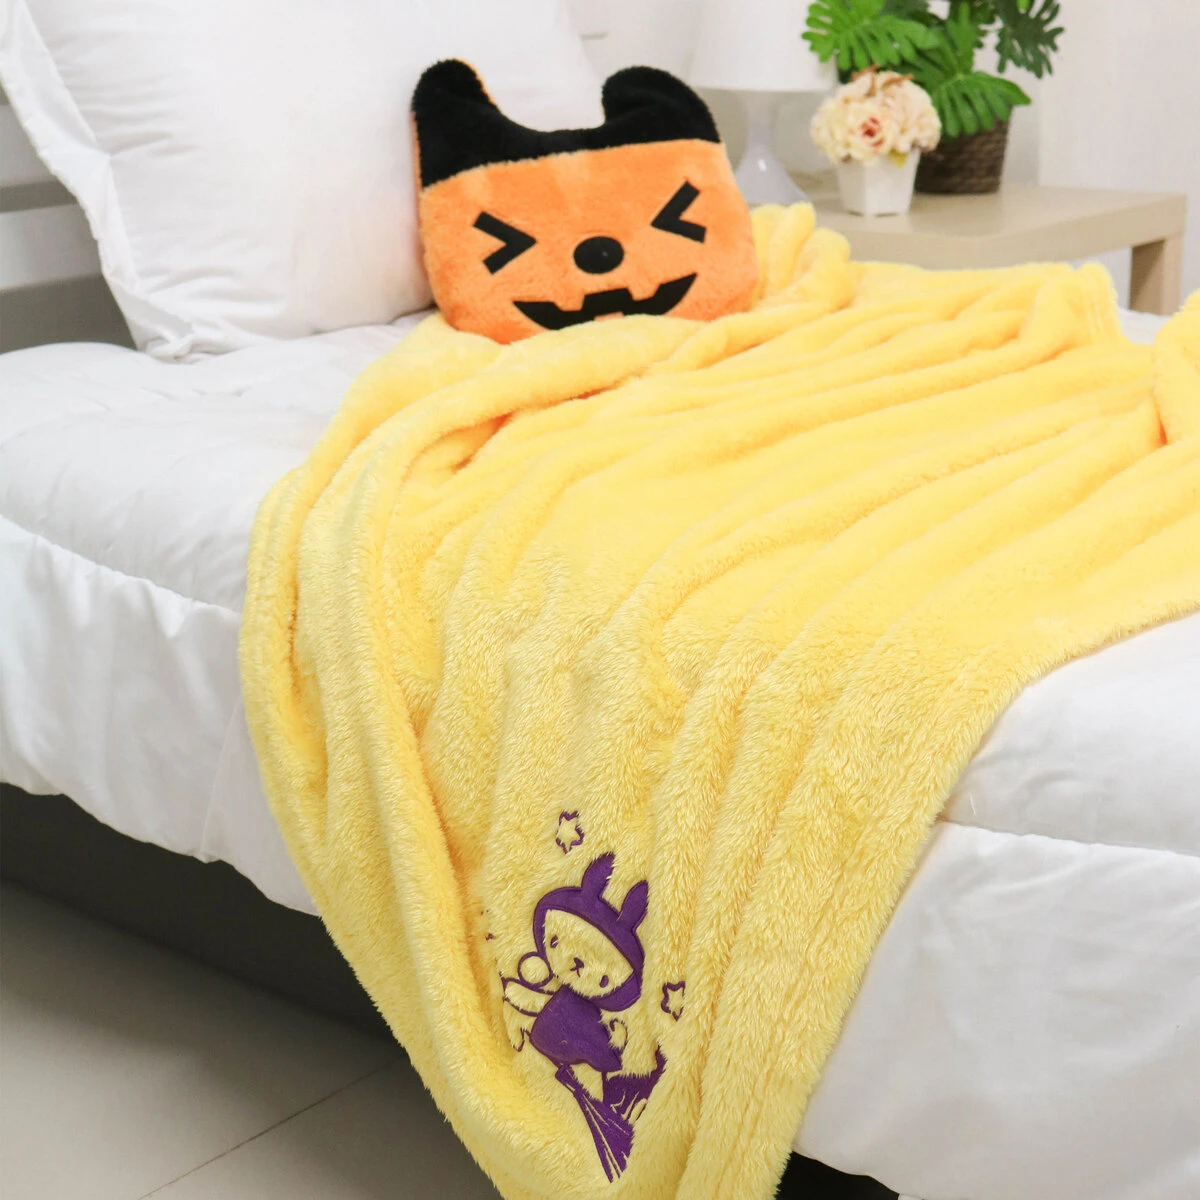 Lily V2 (Halloween Collection) 3D Embroidery Plush Pillow Blanket (Orange,Yellow)